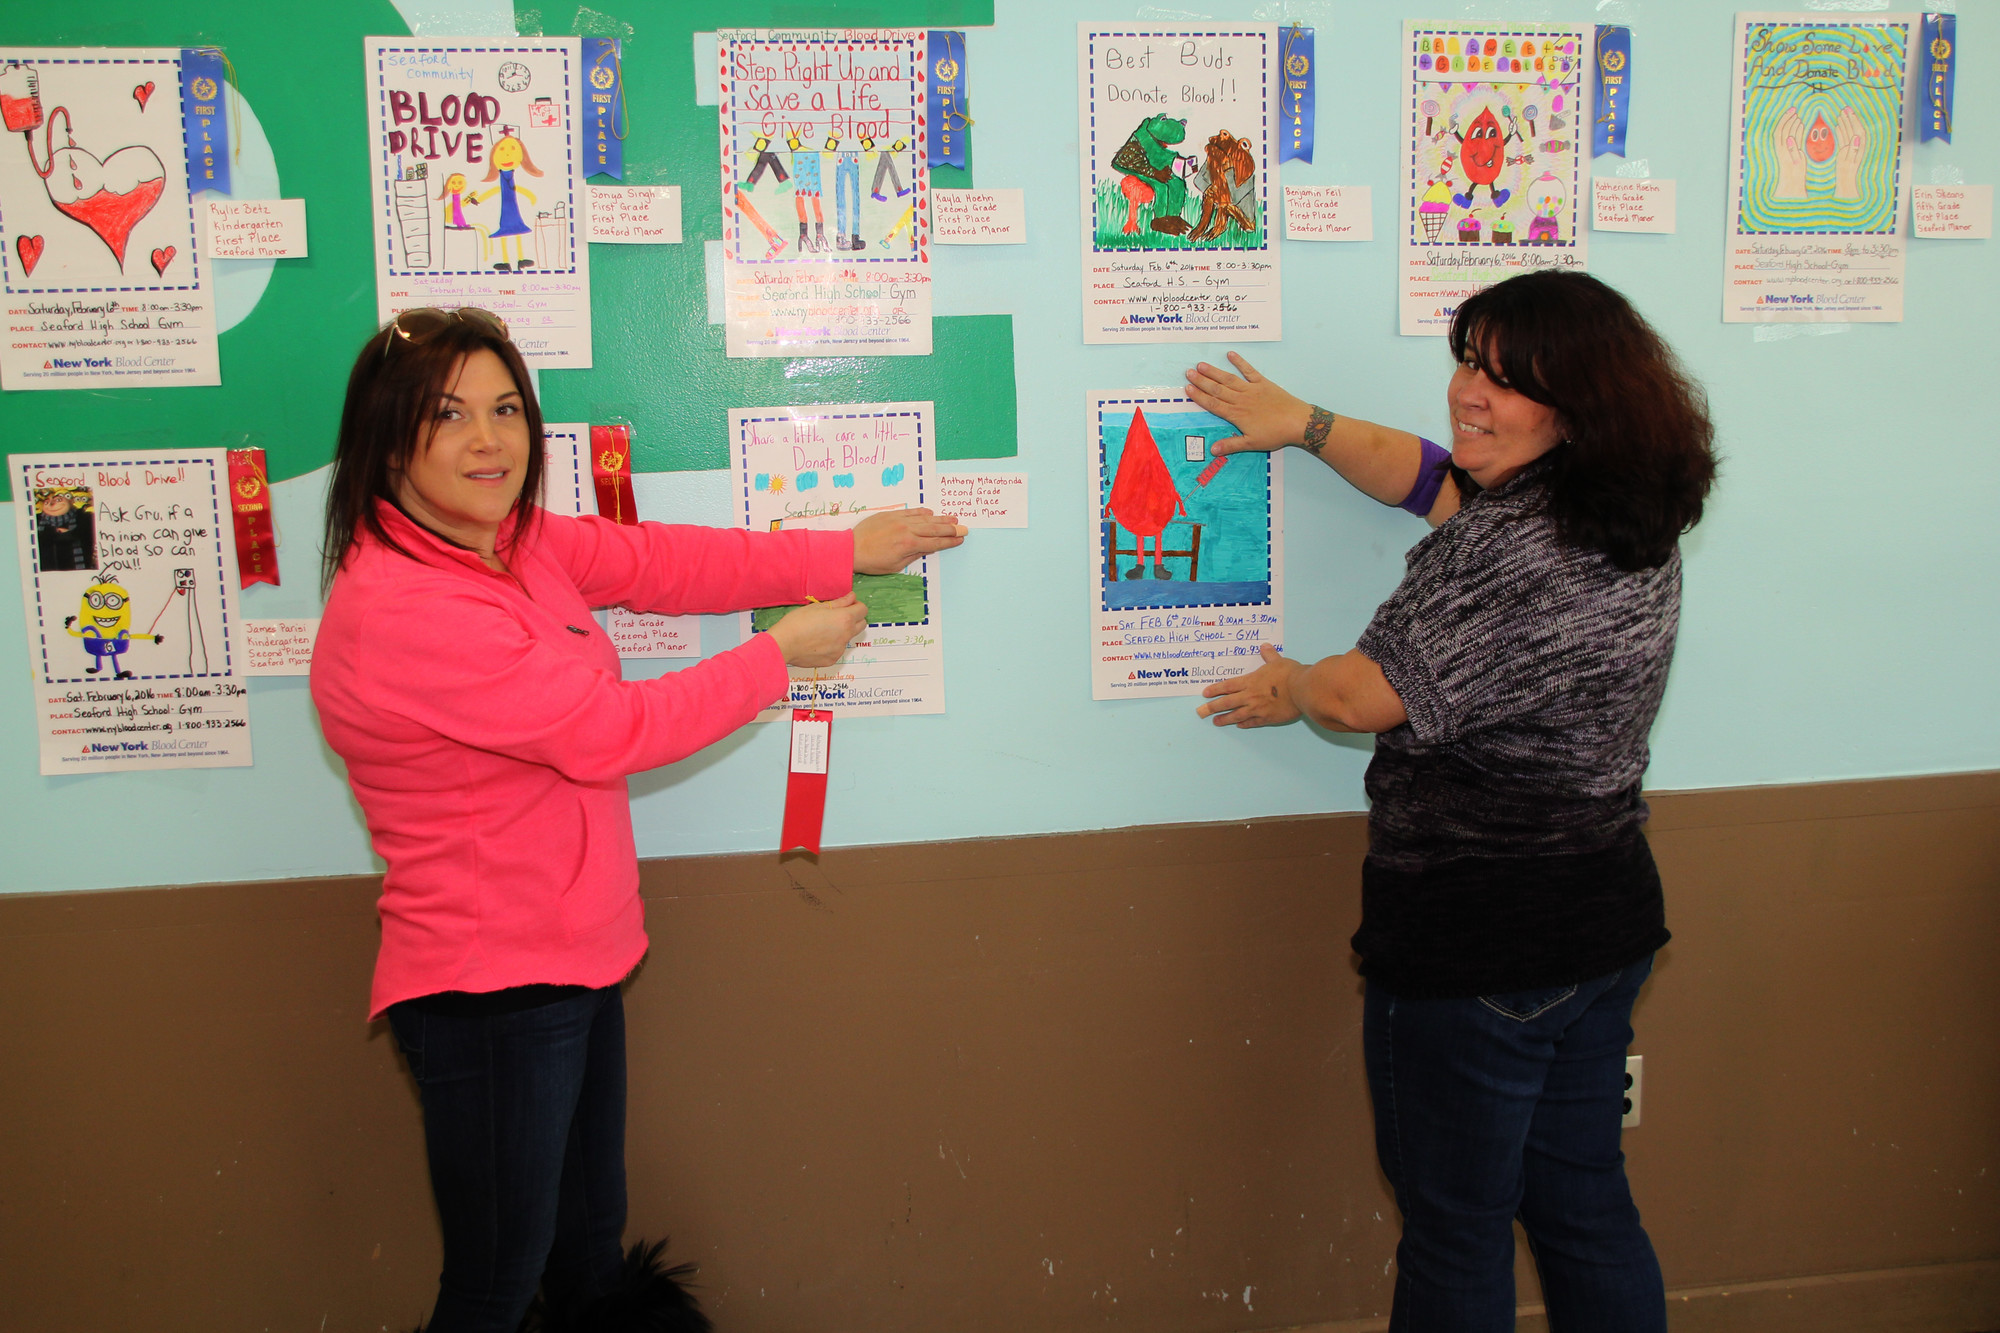 Toni Ann Sorrentino, left, and Donna D’Andrea, of the Seaford Manor PTA, got ready for the blood drive by hanging up the winning entries in the poster contest.